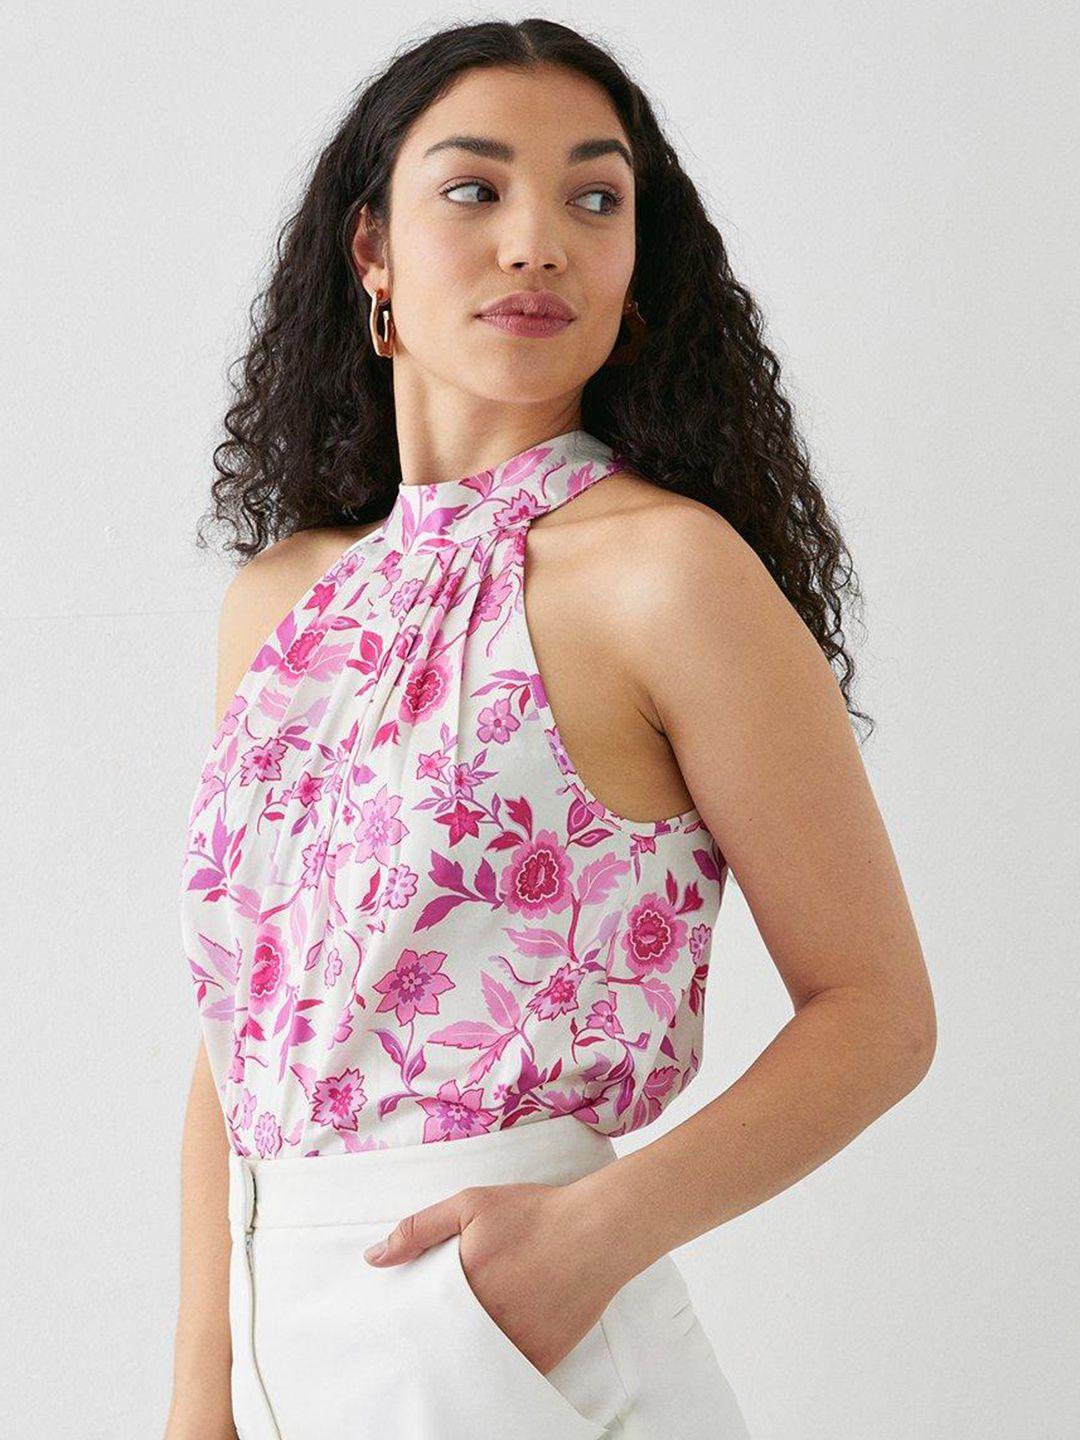 dorothy perkins satin finish floral print pleated top with tie-up closure